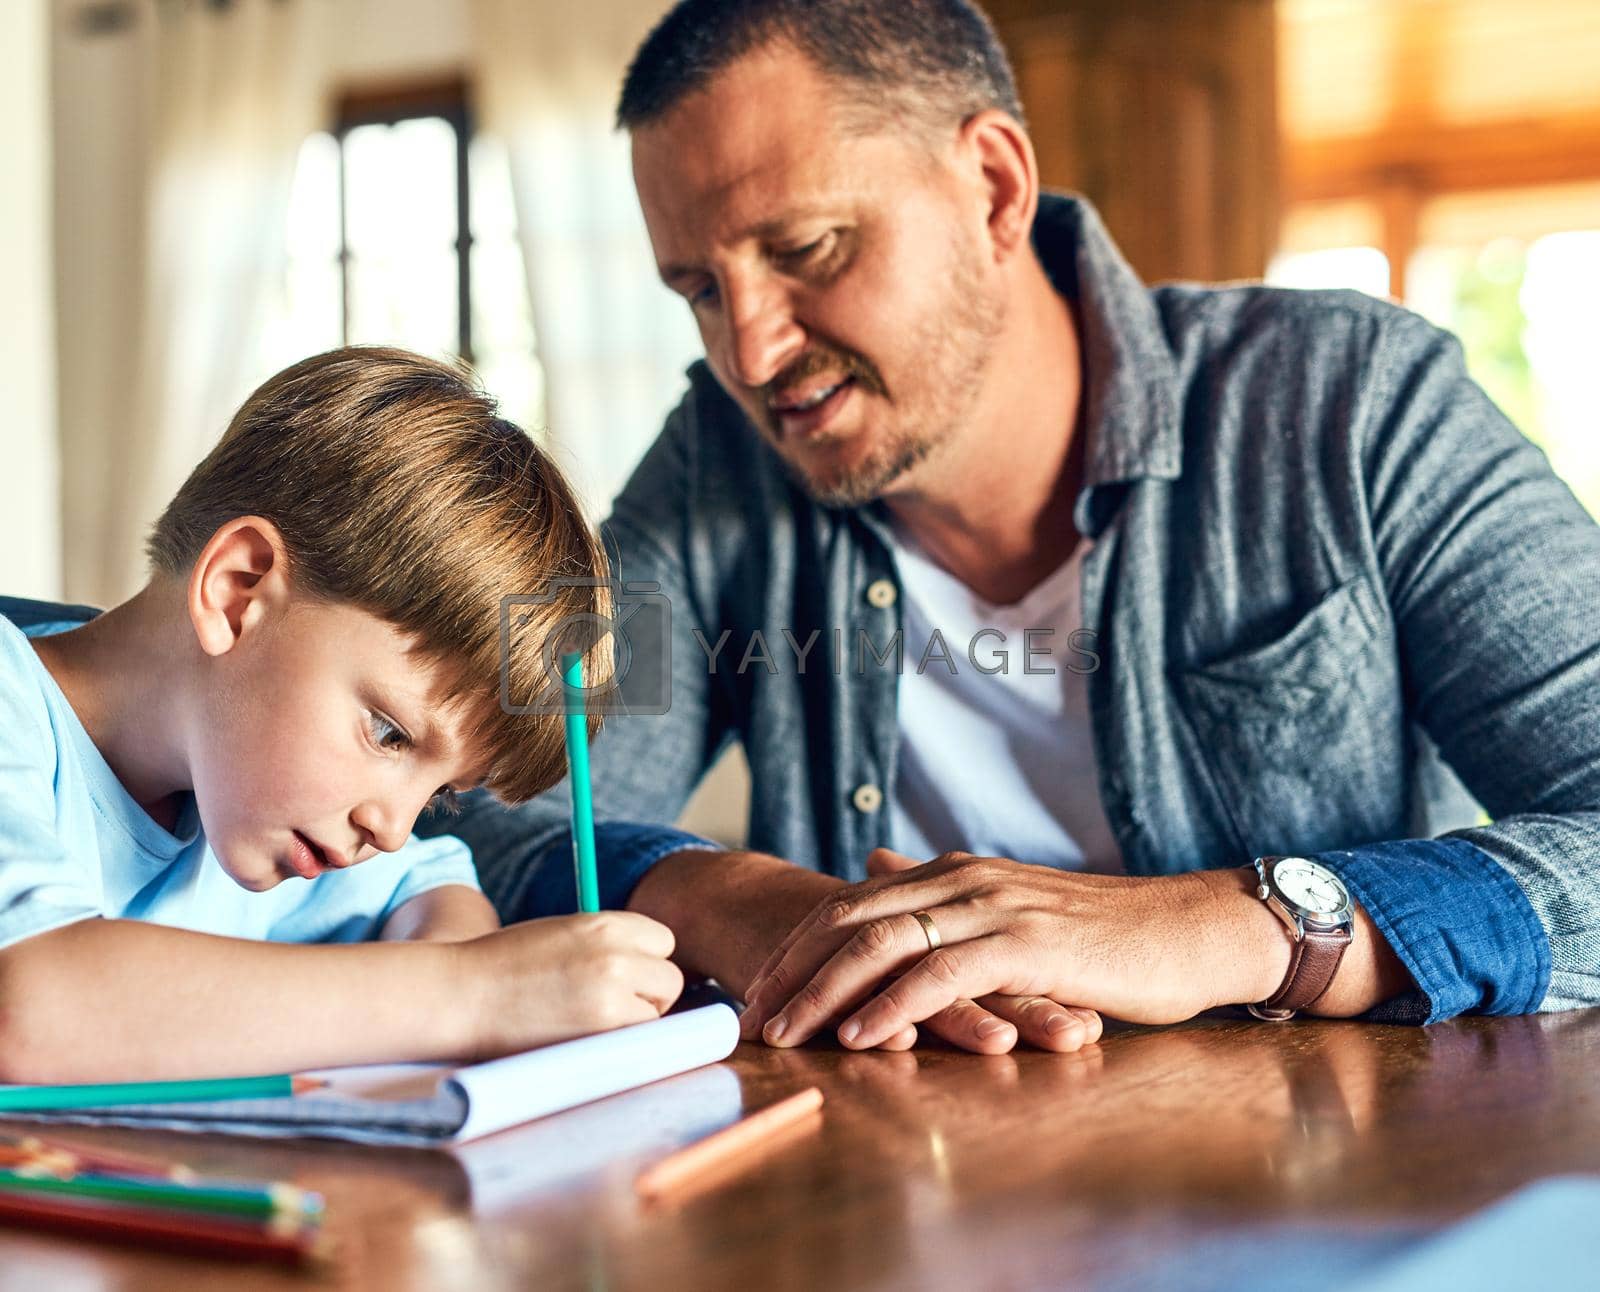 Shot of a father helping his son with his homework.